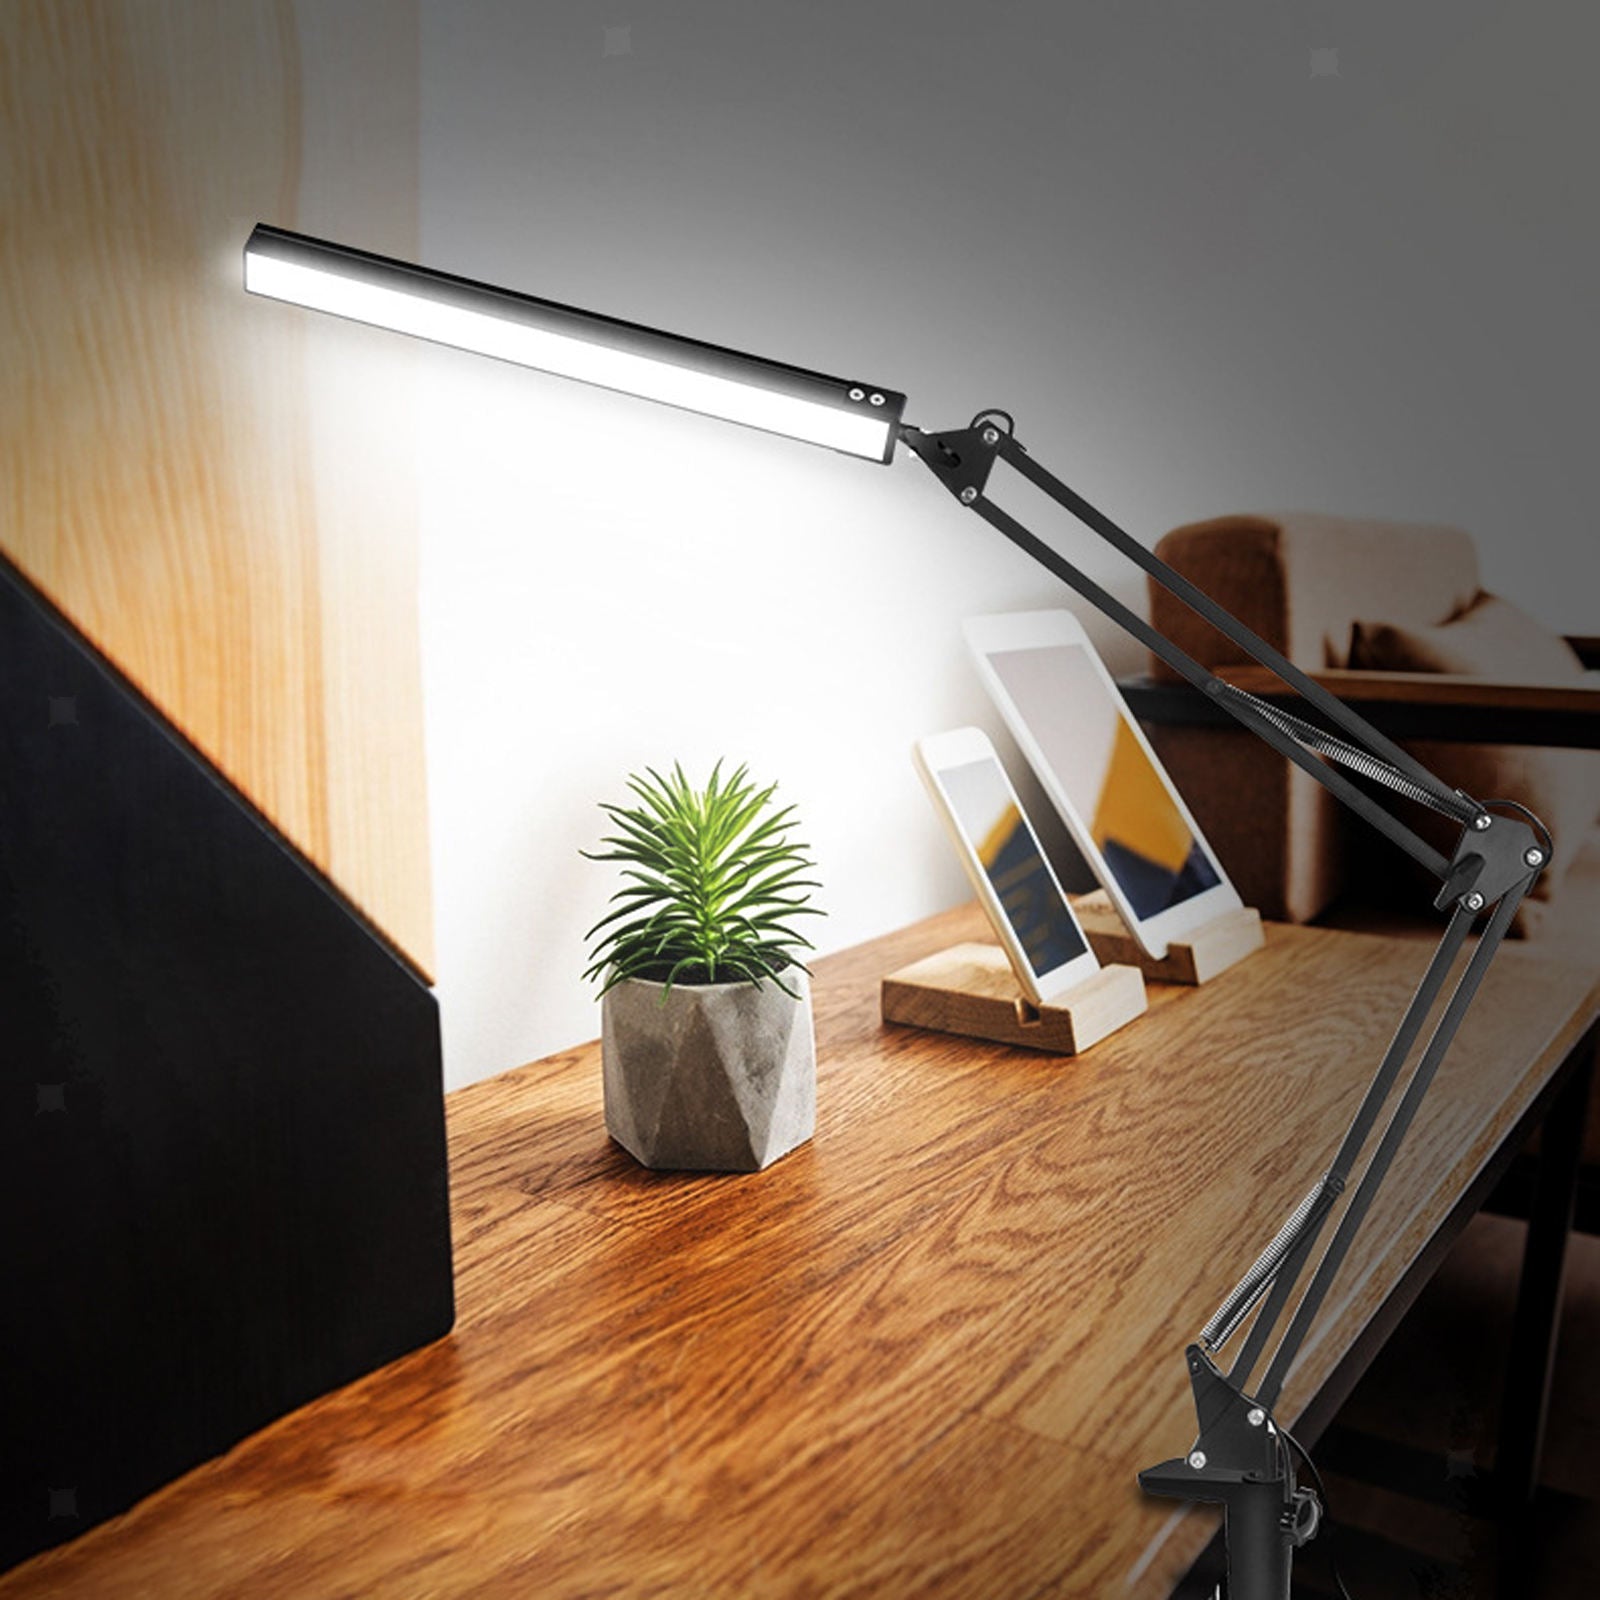 LED Desk Lamp with Clamp，Metal Swing Arm Folding Table Lamp, Eye-Care 10